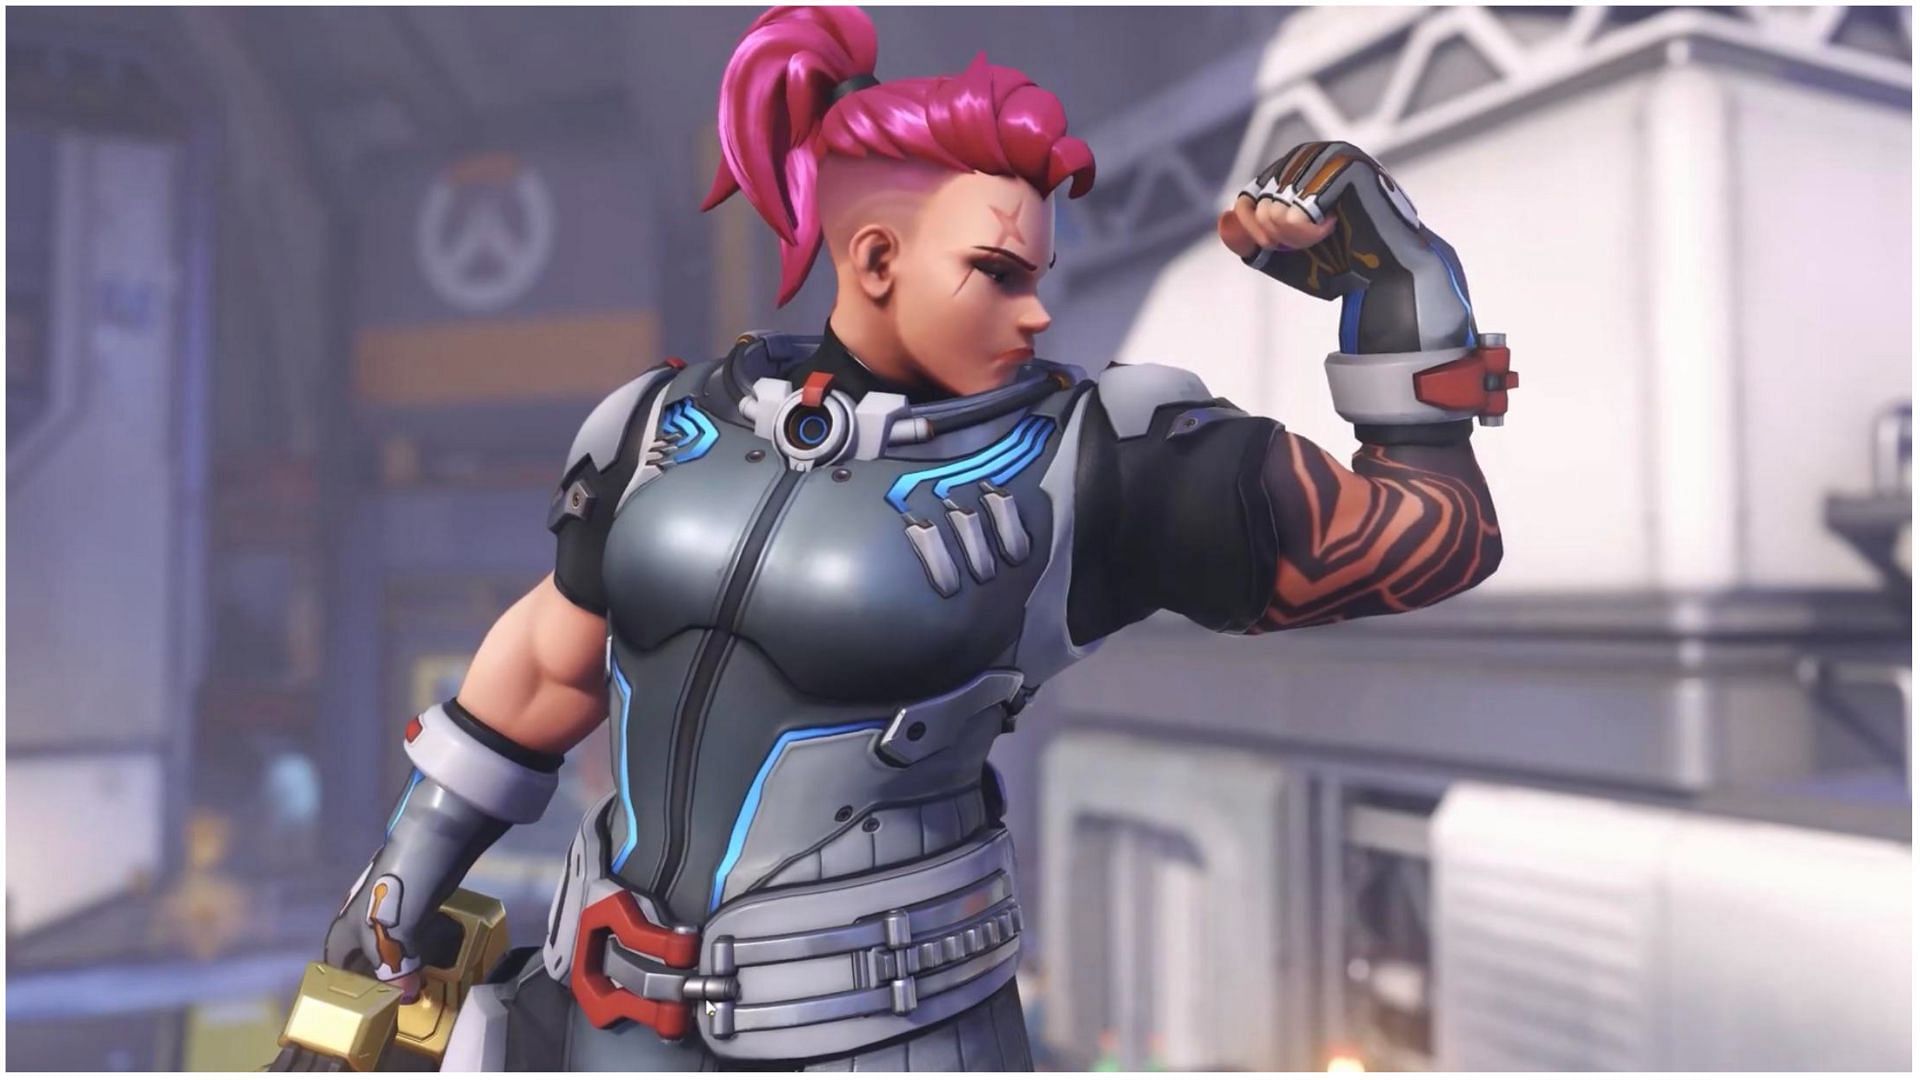 Zarya as seen in Overwatch 2 (Image via Activision Blizzard)